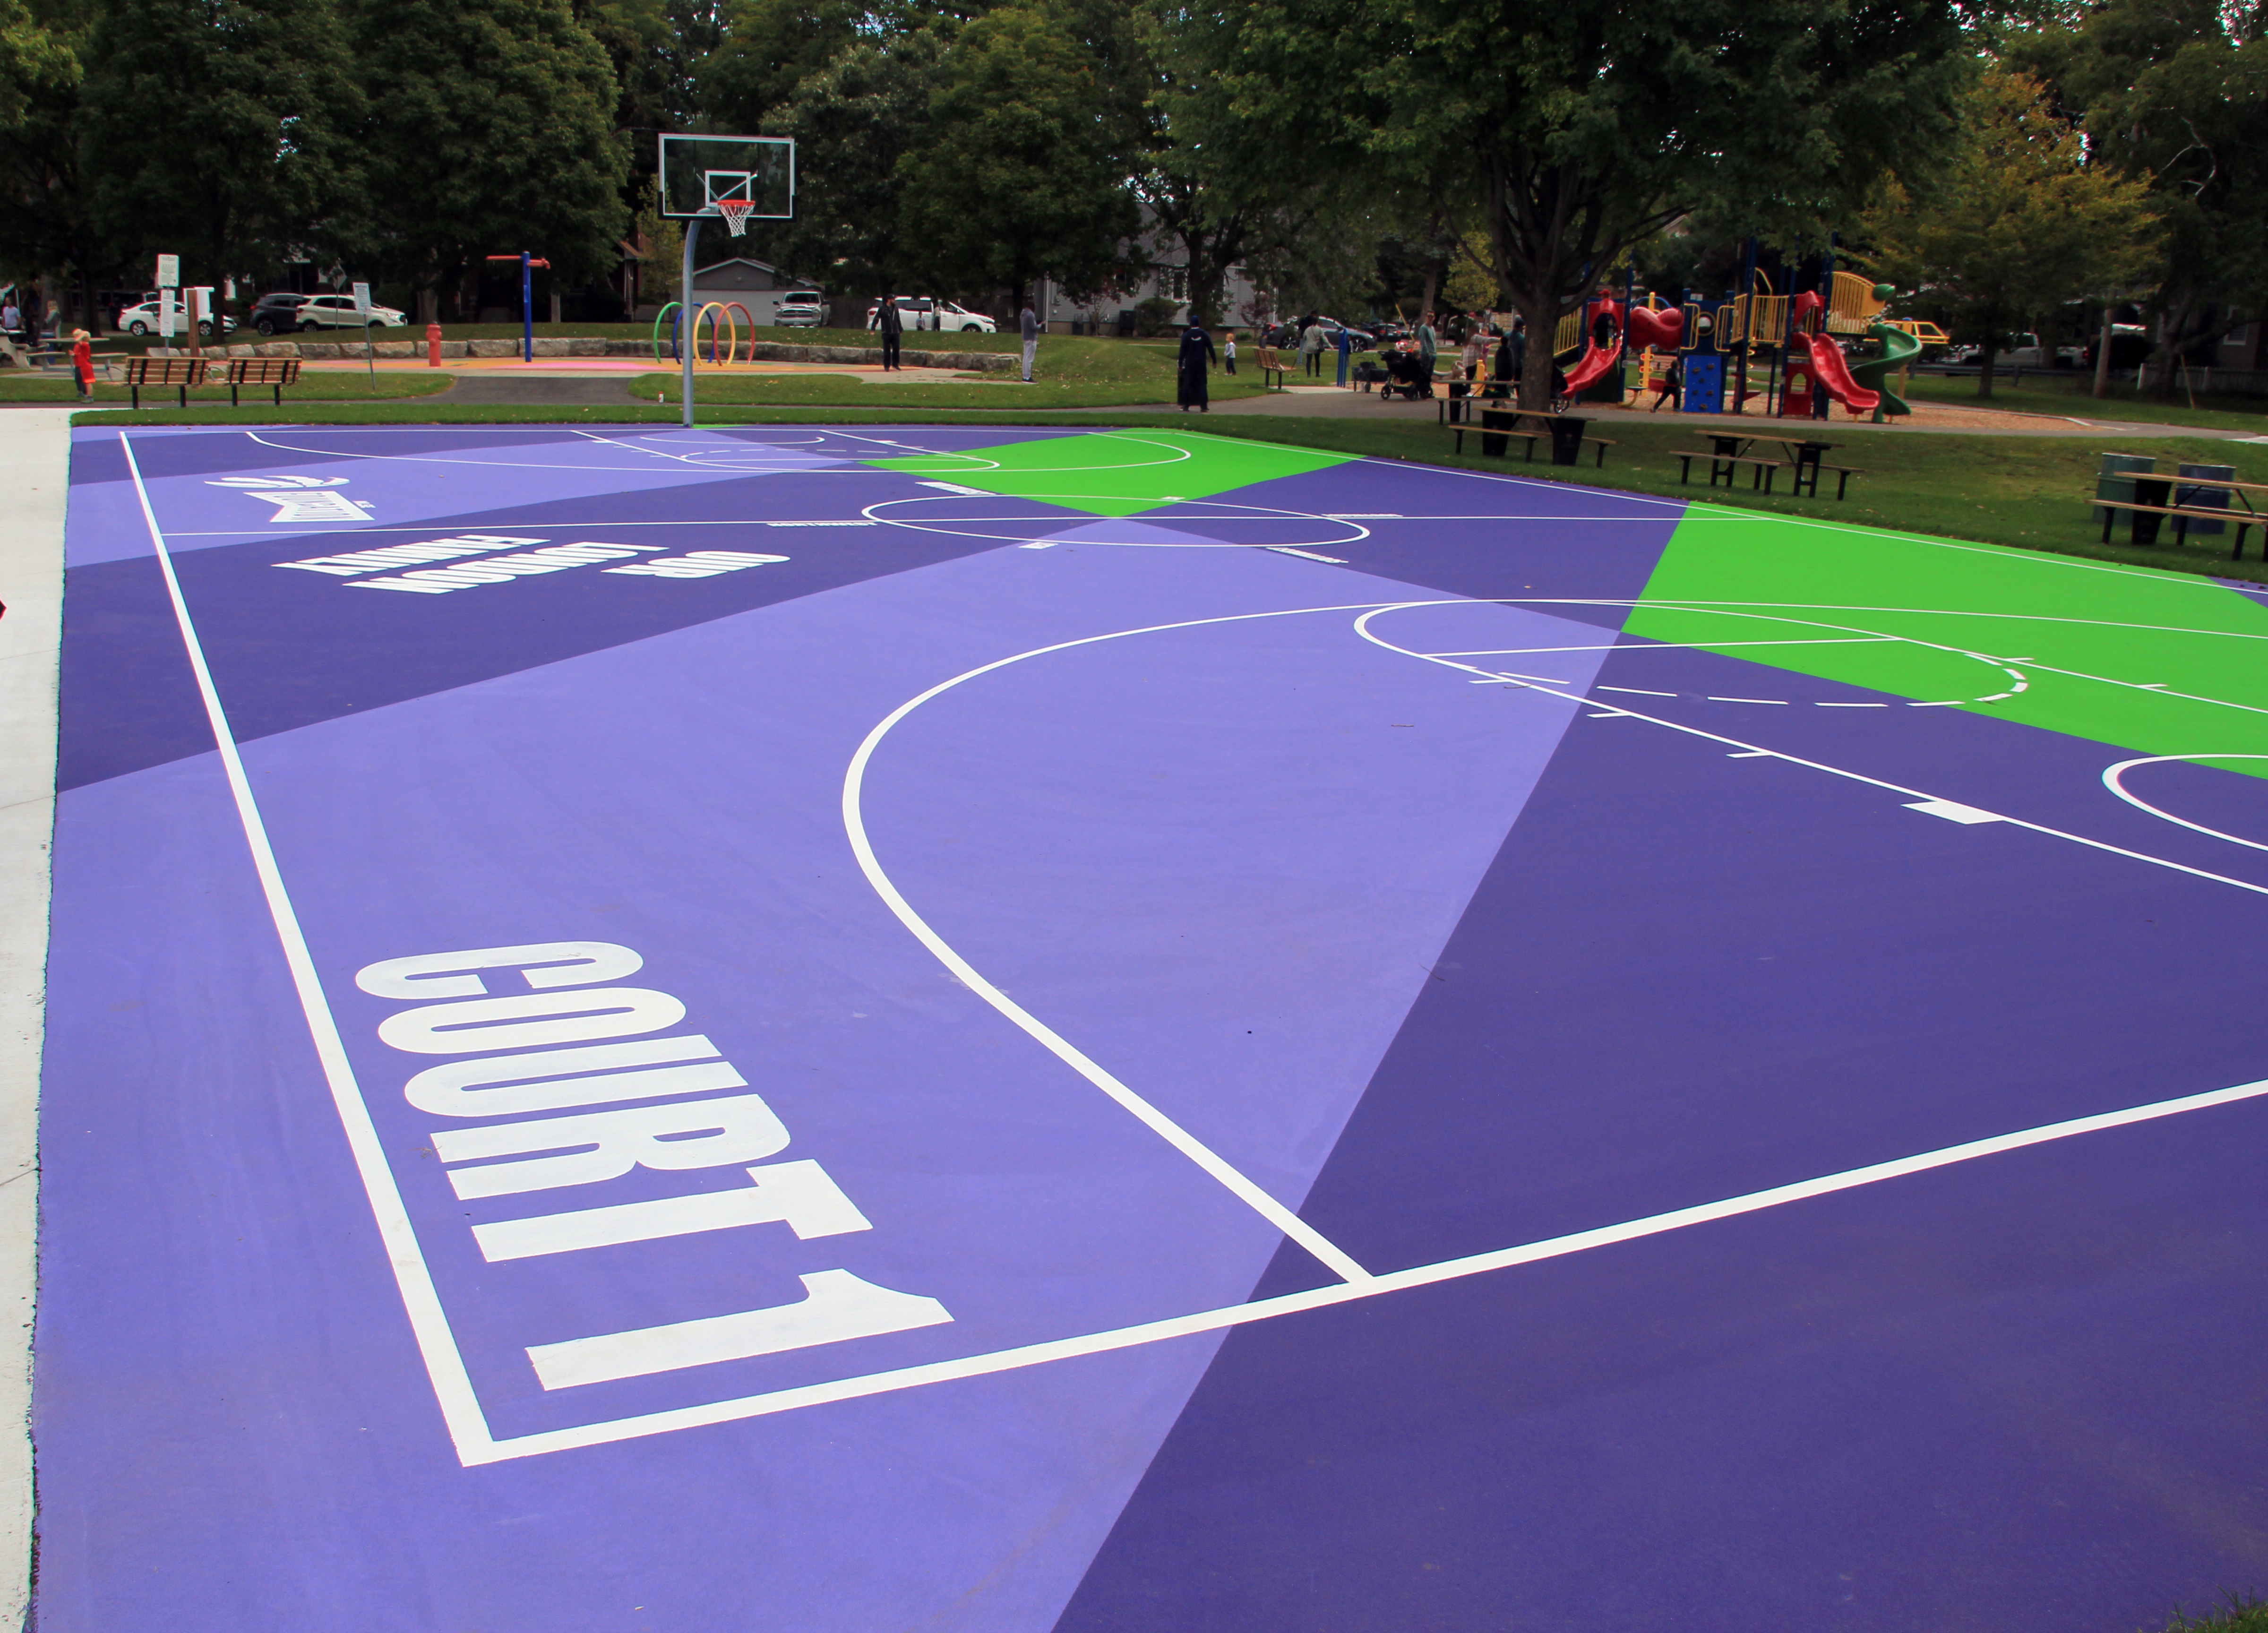 Basketball Courts in London – Courts of the World